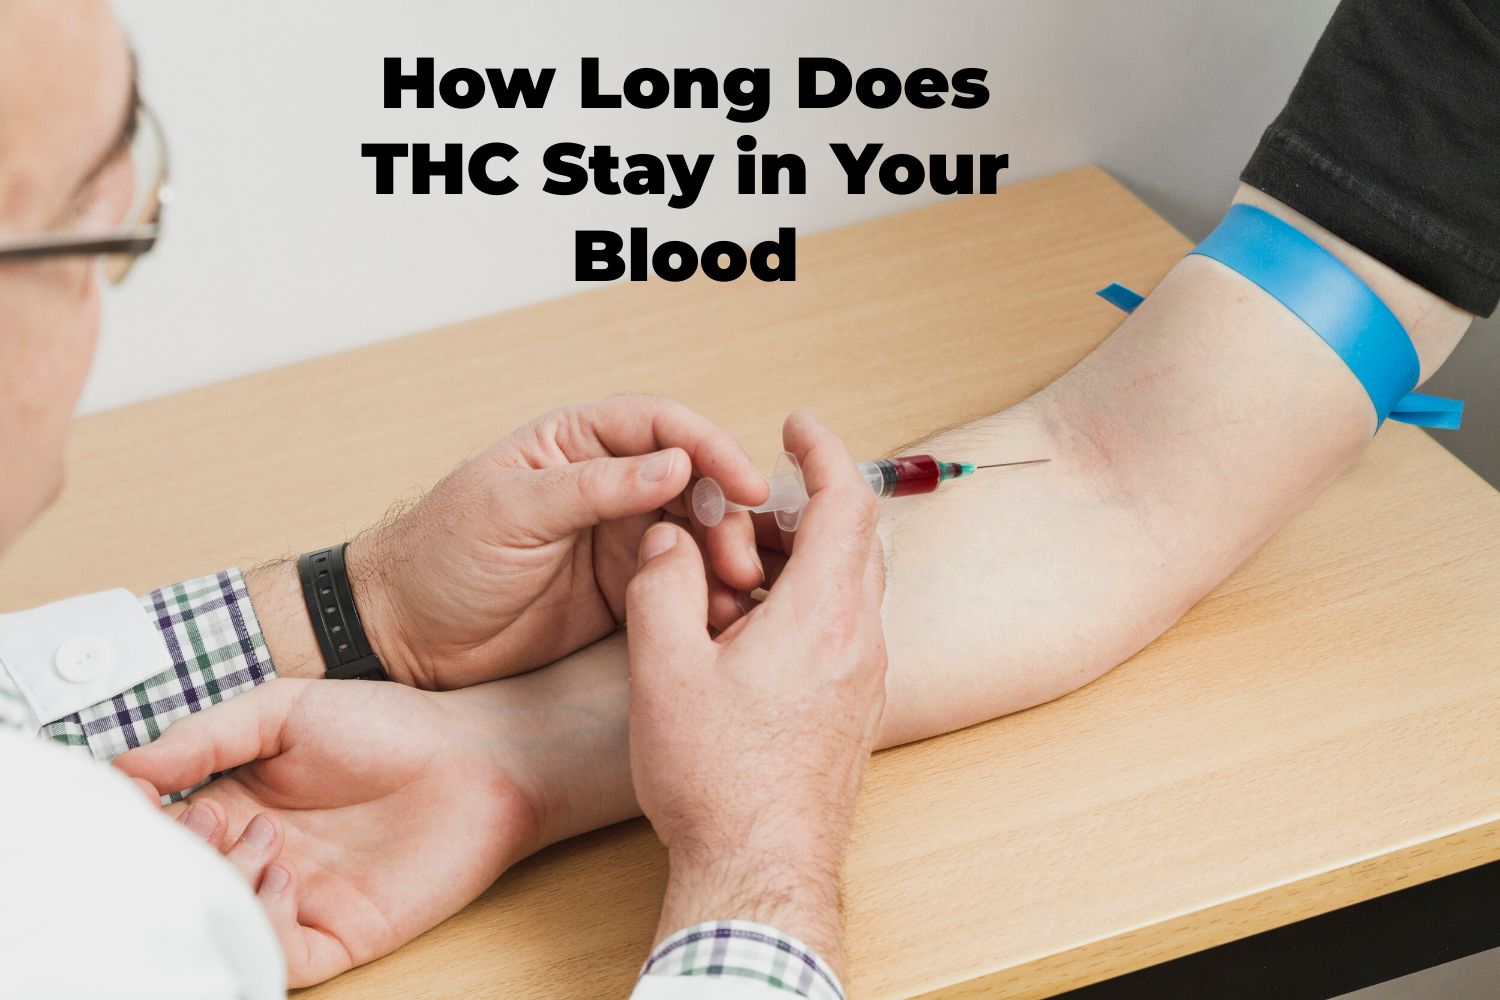 How Long Does THC Stay in Your Blood